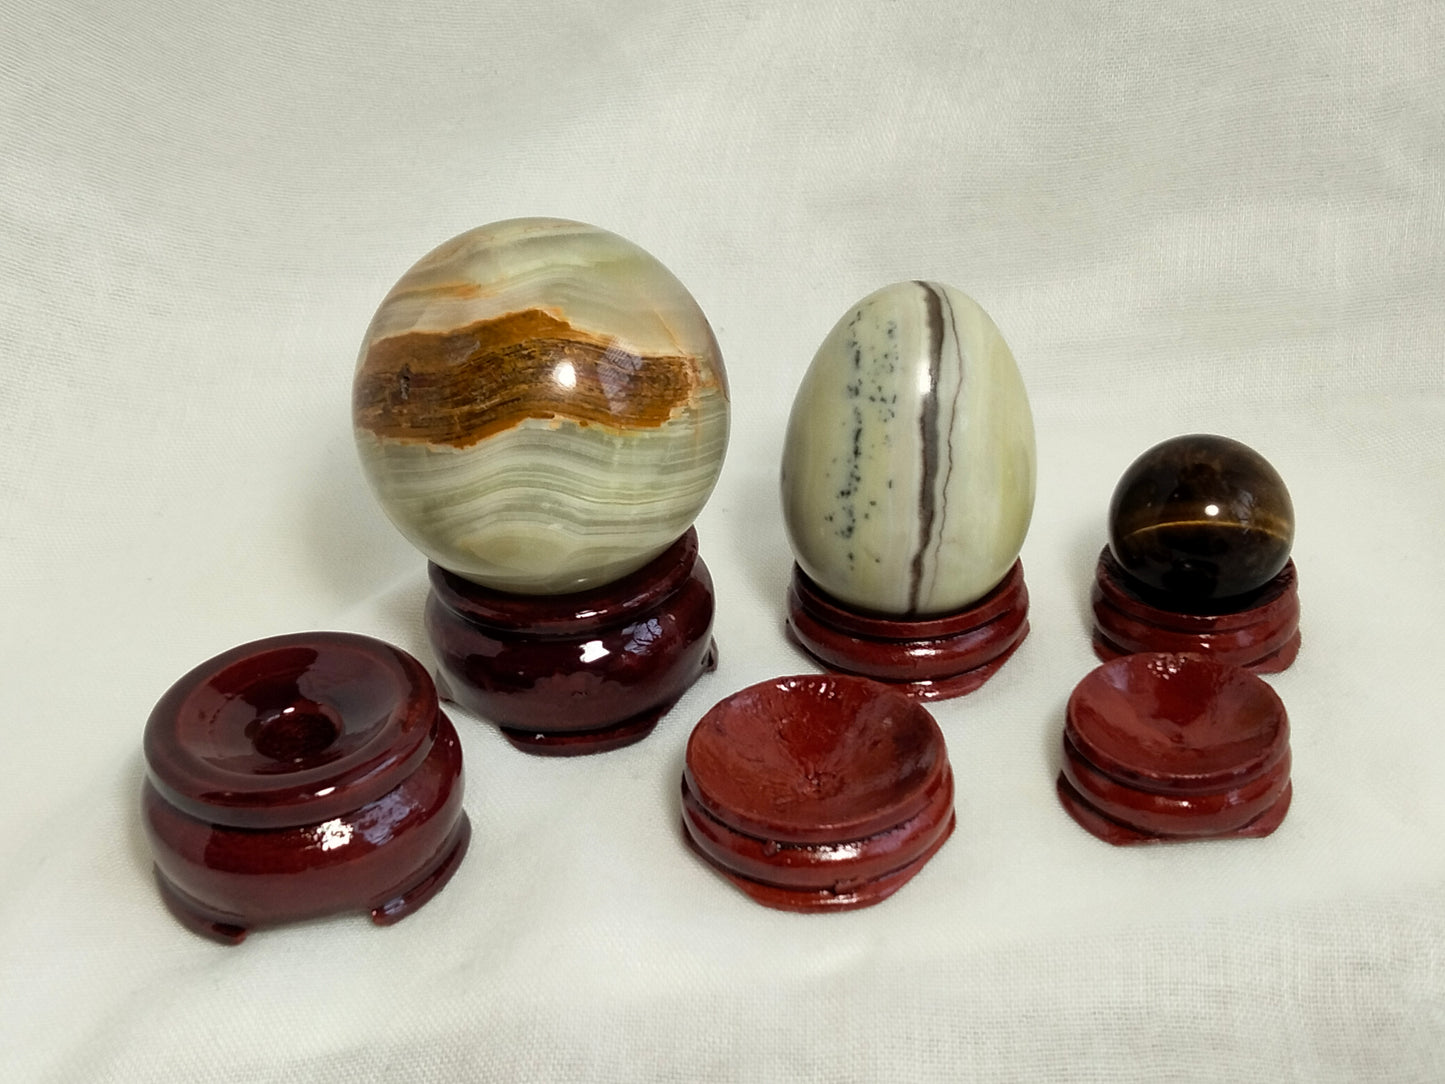 Sphere/Egg-Shaped Stone Wood Stand - 3/4" high X 1-1/8" round